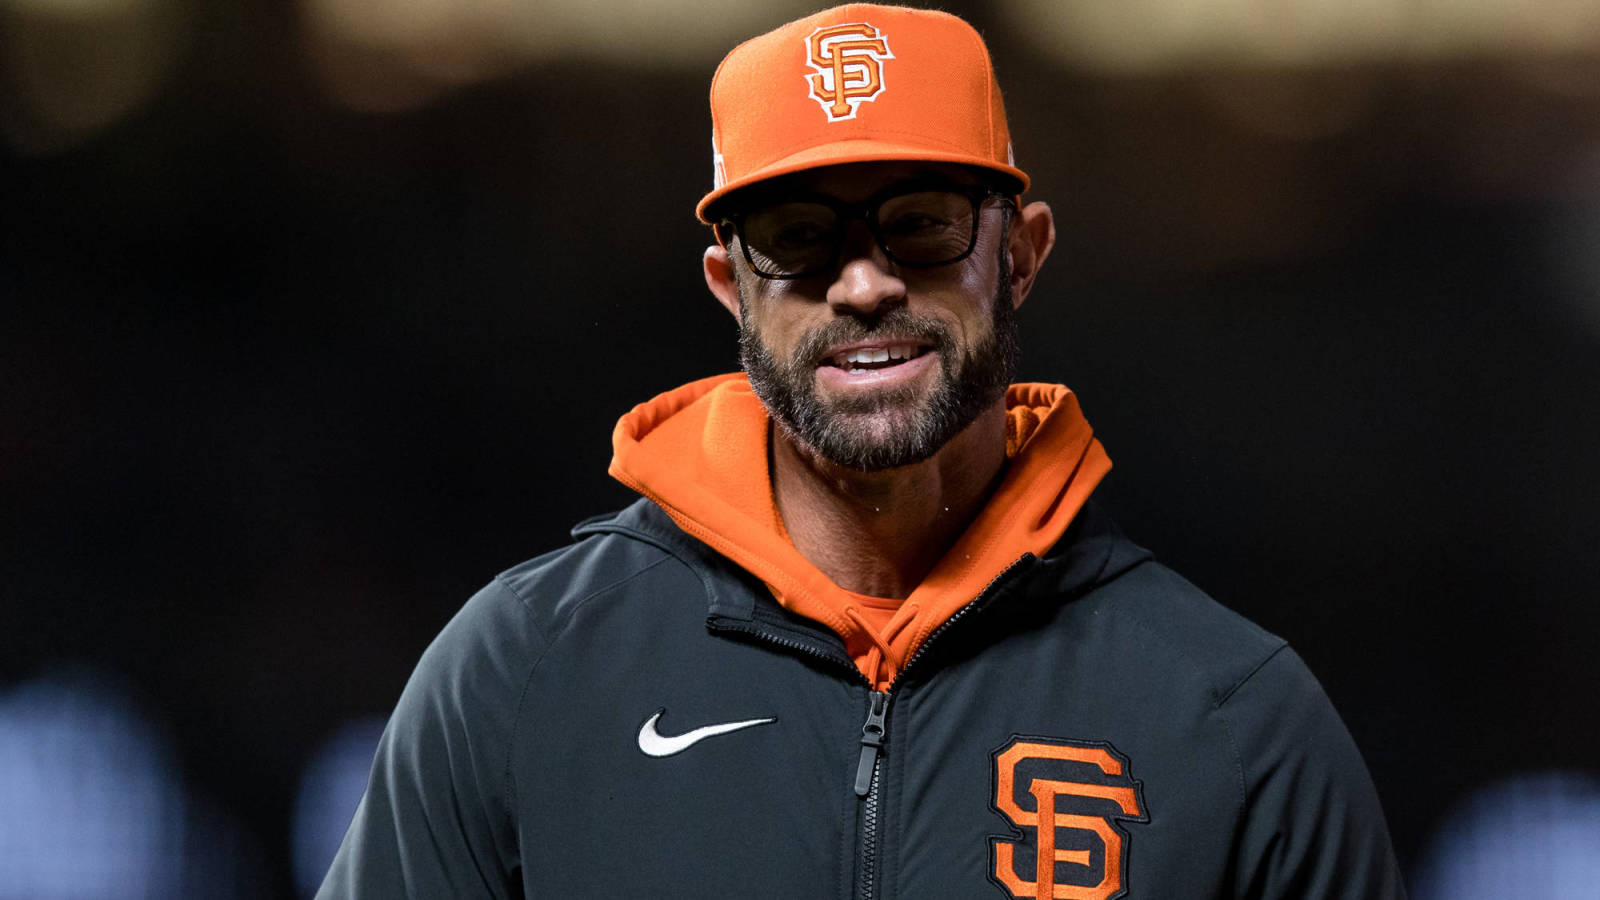 Giants sign manager Gabe Kapler to contract extension